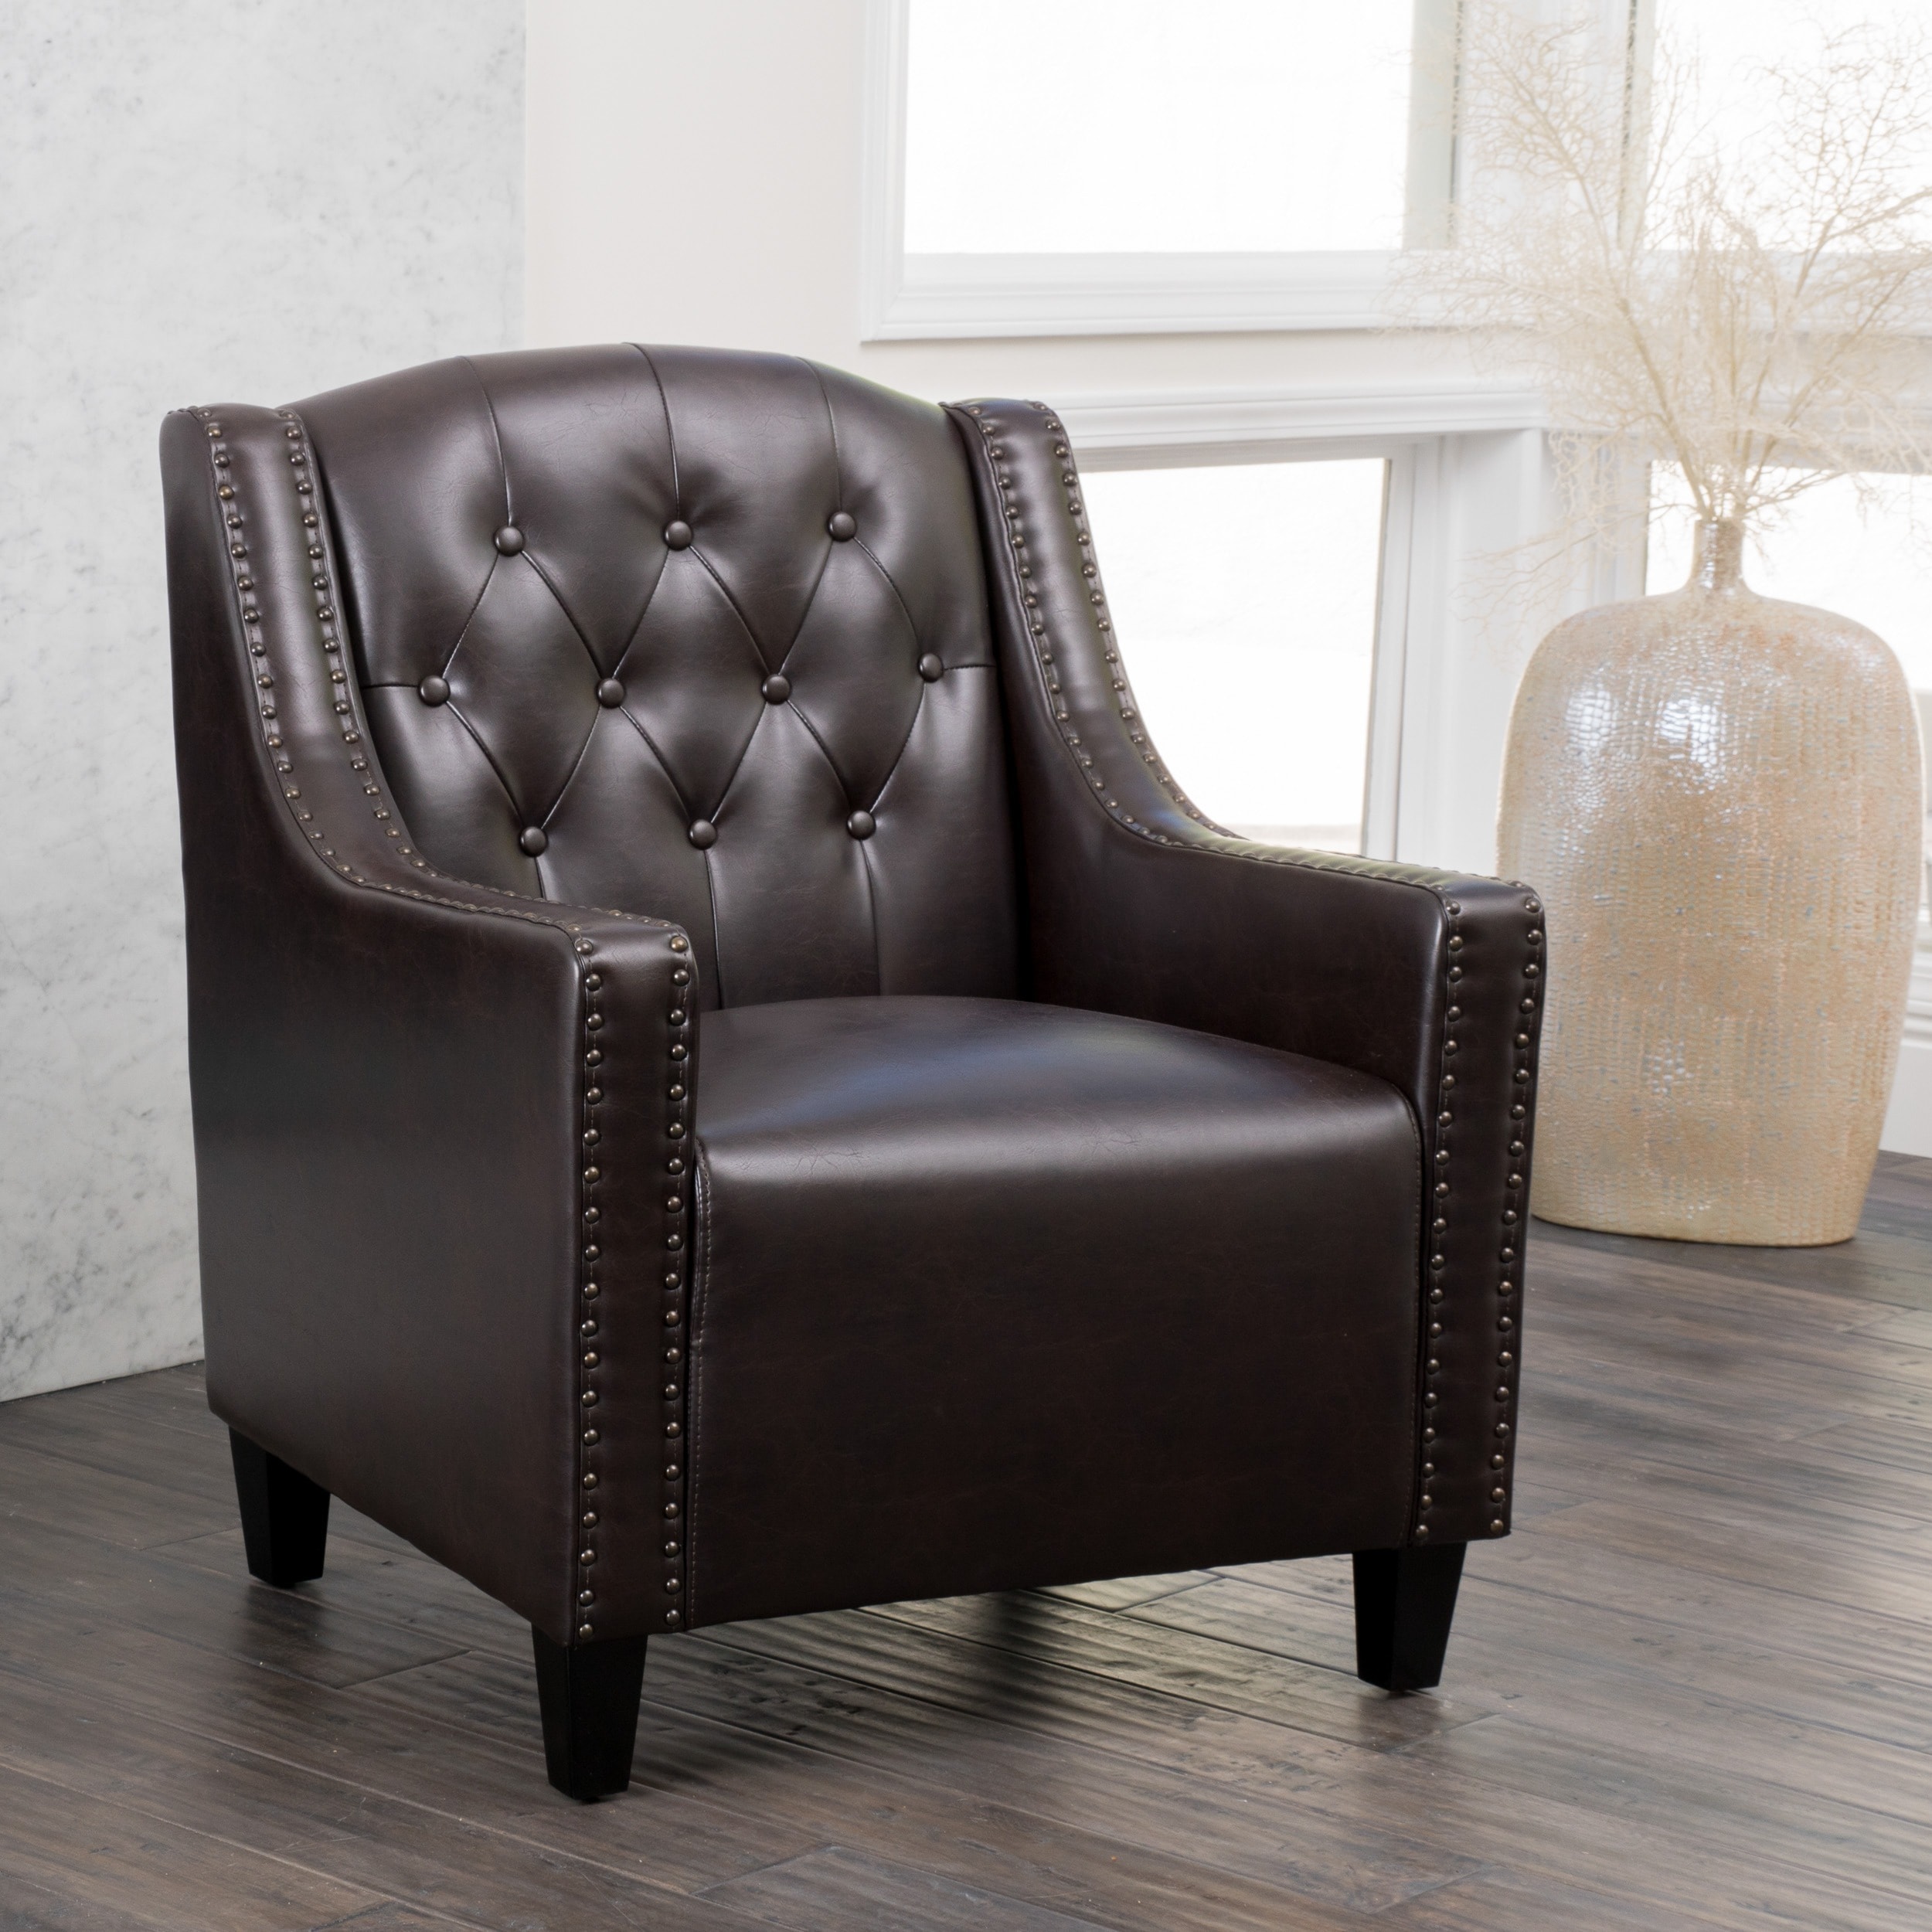 Christopher Knight Home Gabriel Tufted Leather Club Chair